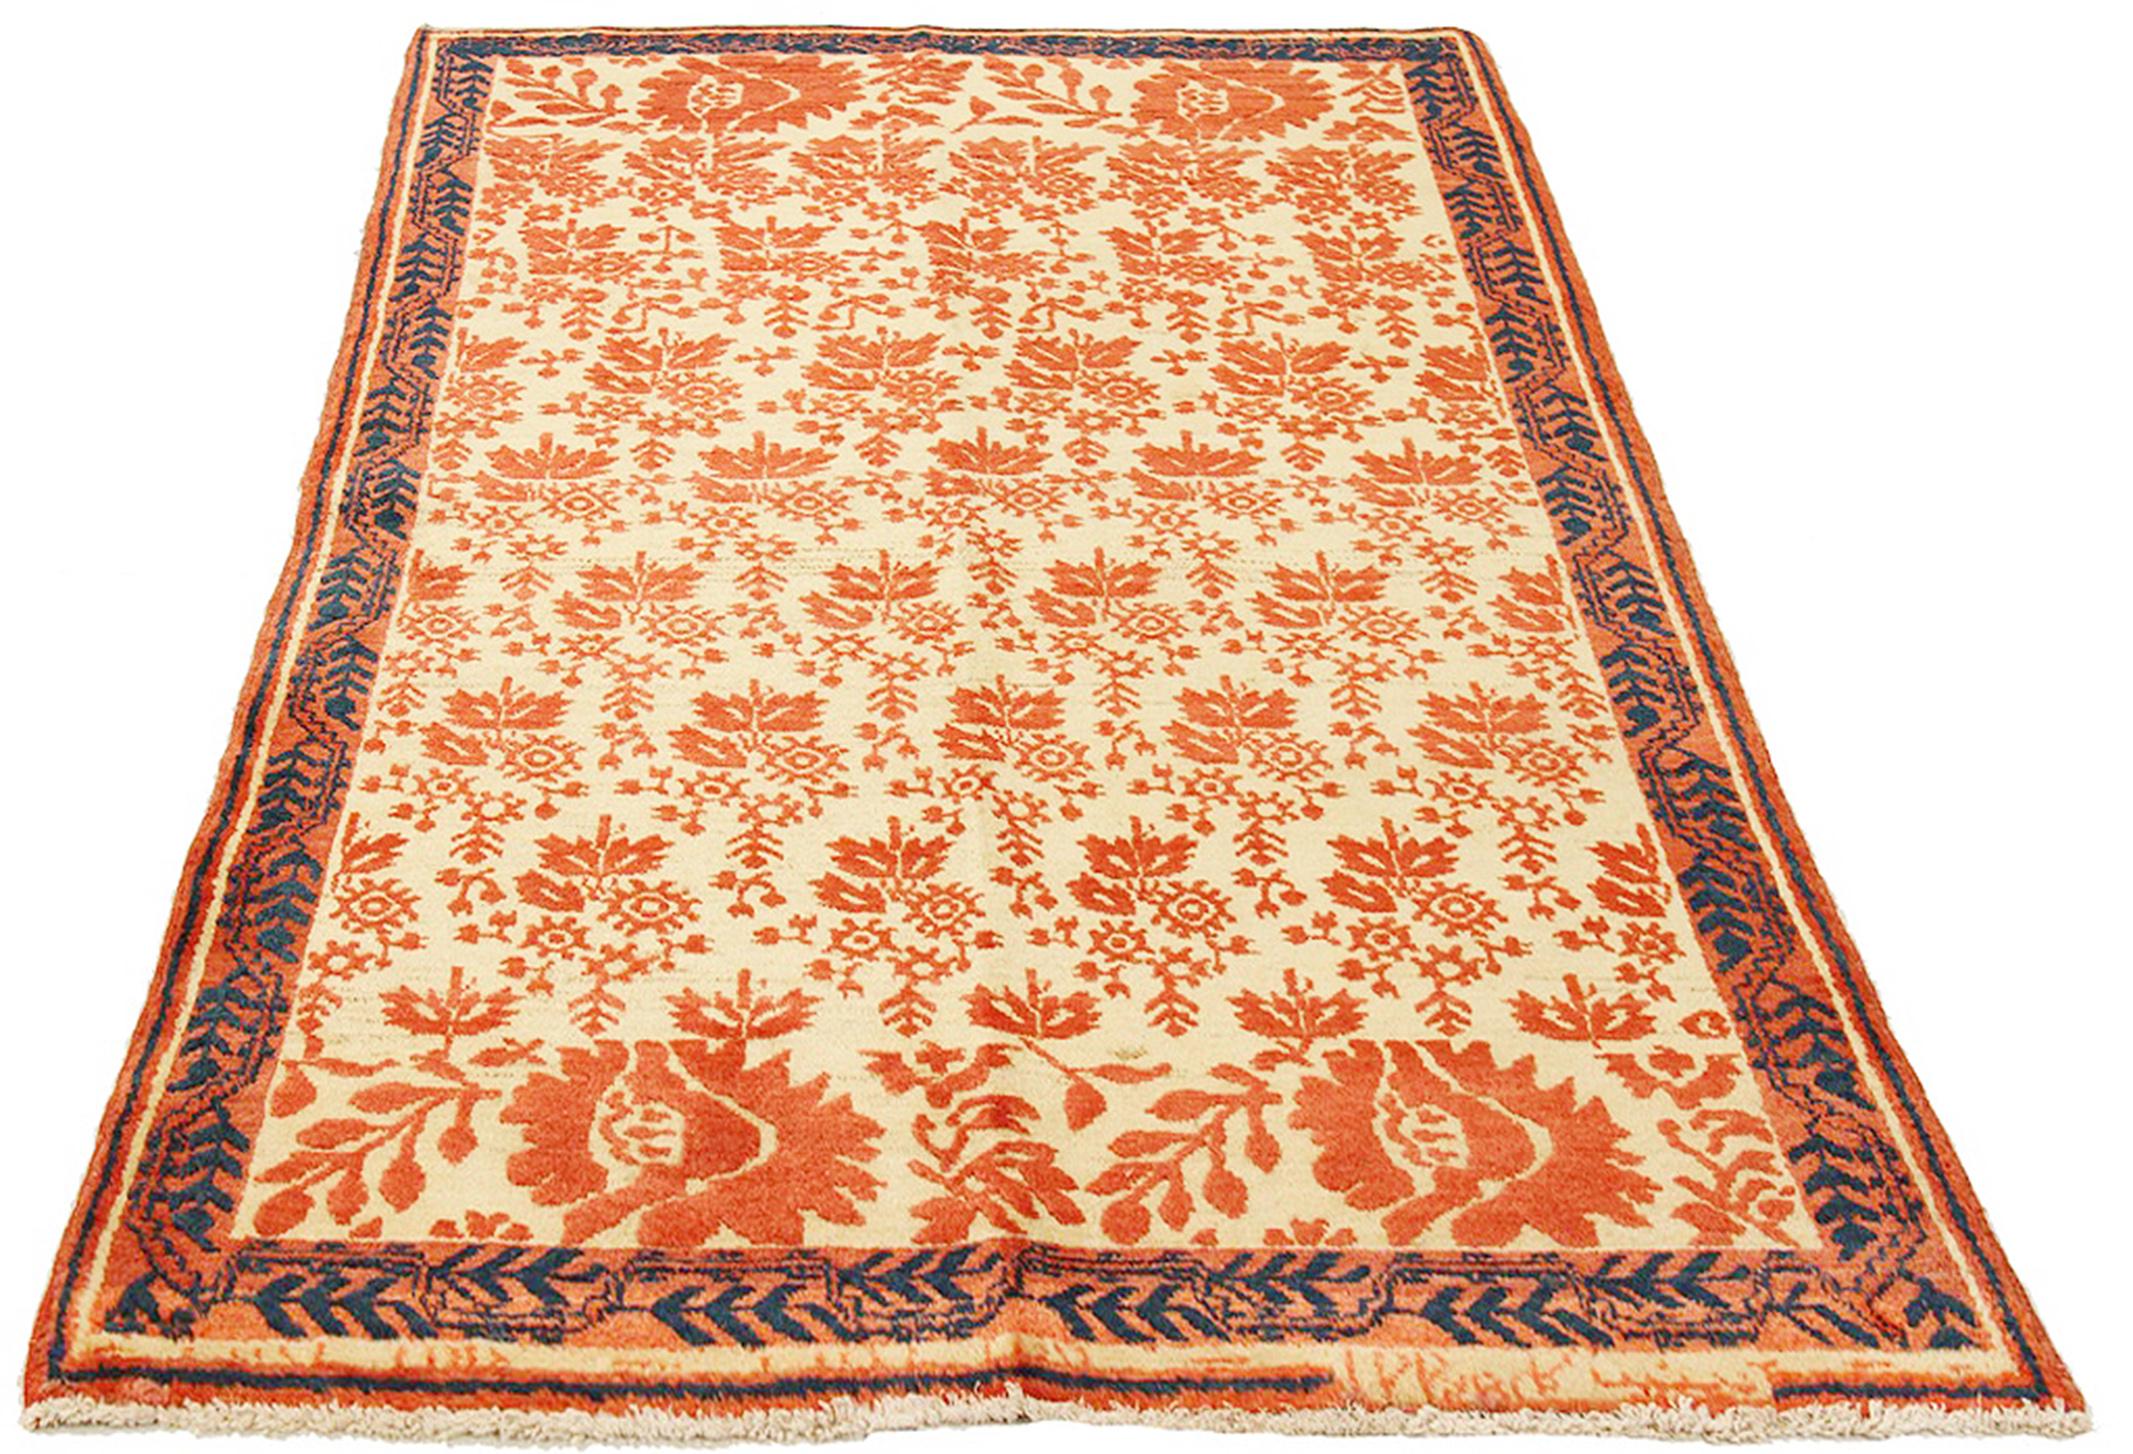 Antique Persian rug handwoven from the finest sheep’s wool and colored with all-natural vegetable dyes that are safe for humans and pets. It’s a traditional Malayer design featuring navy and orange floral details over an ivory field. It’s a lovely